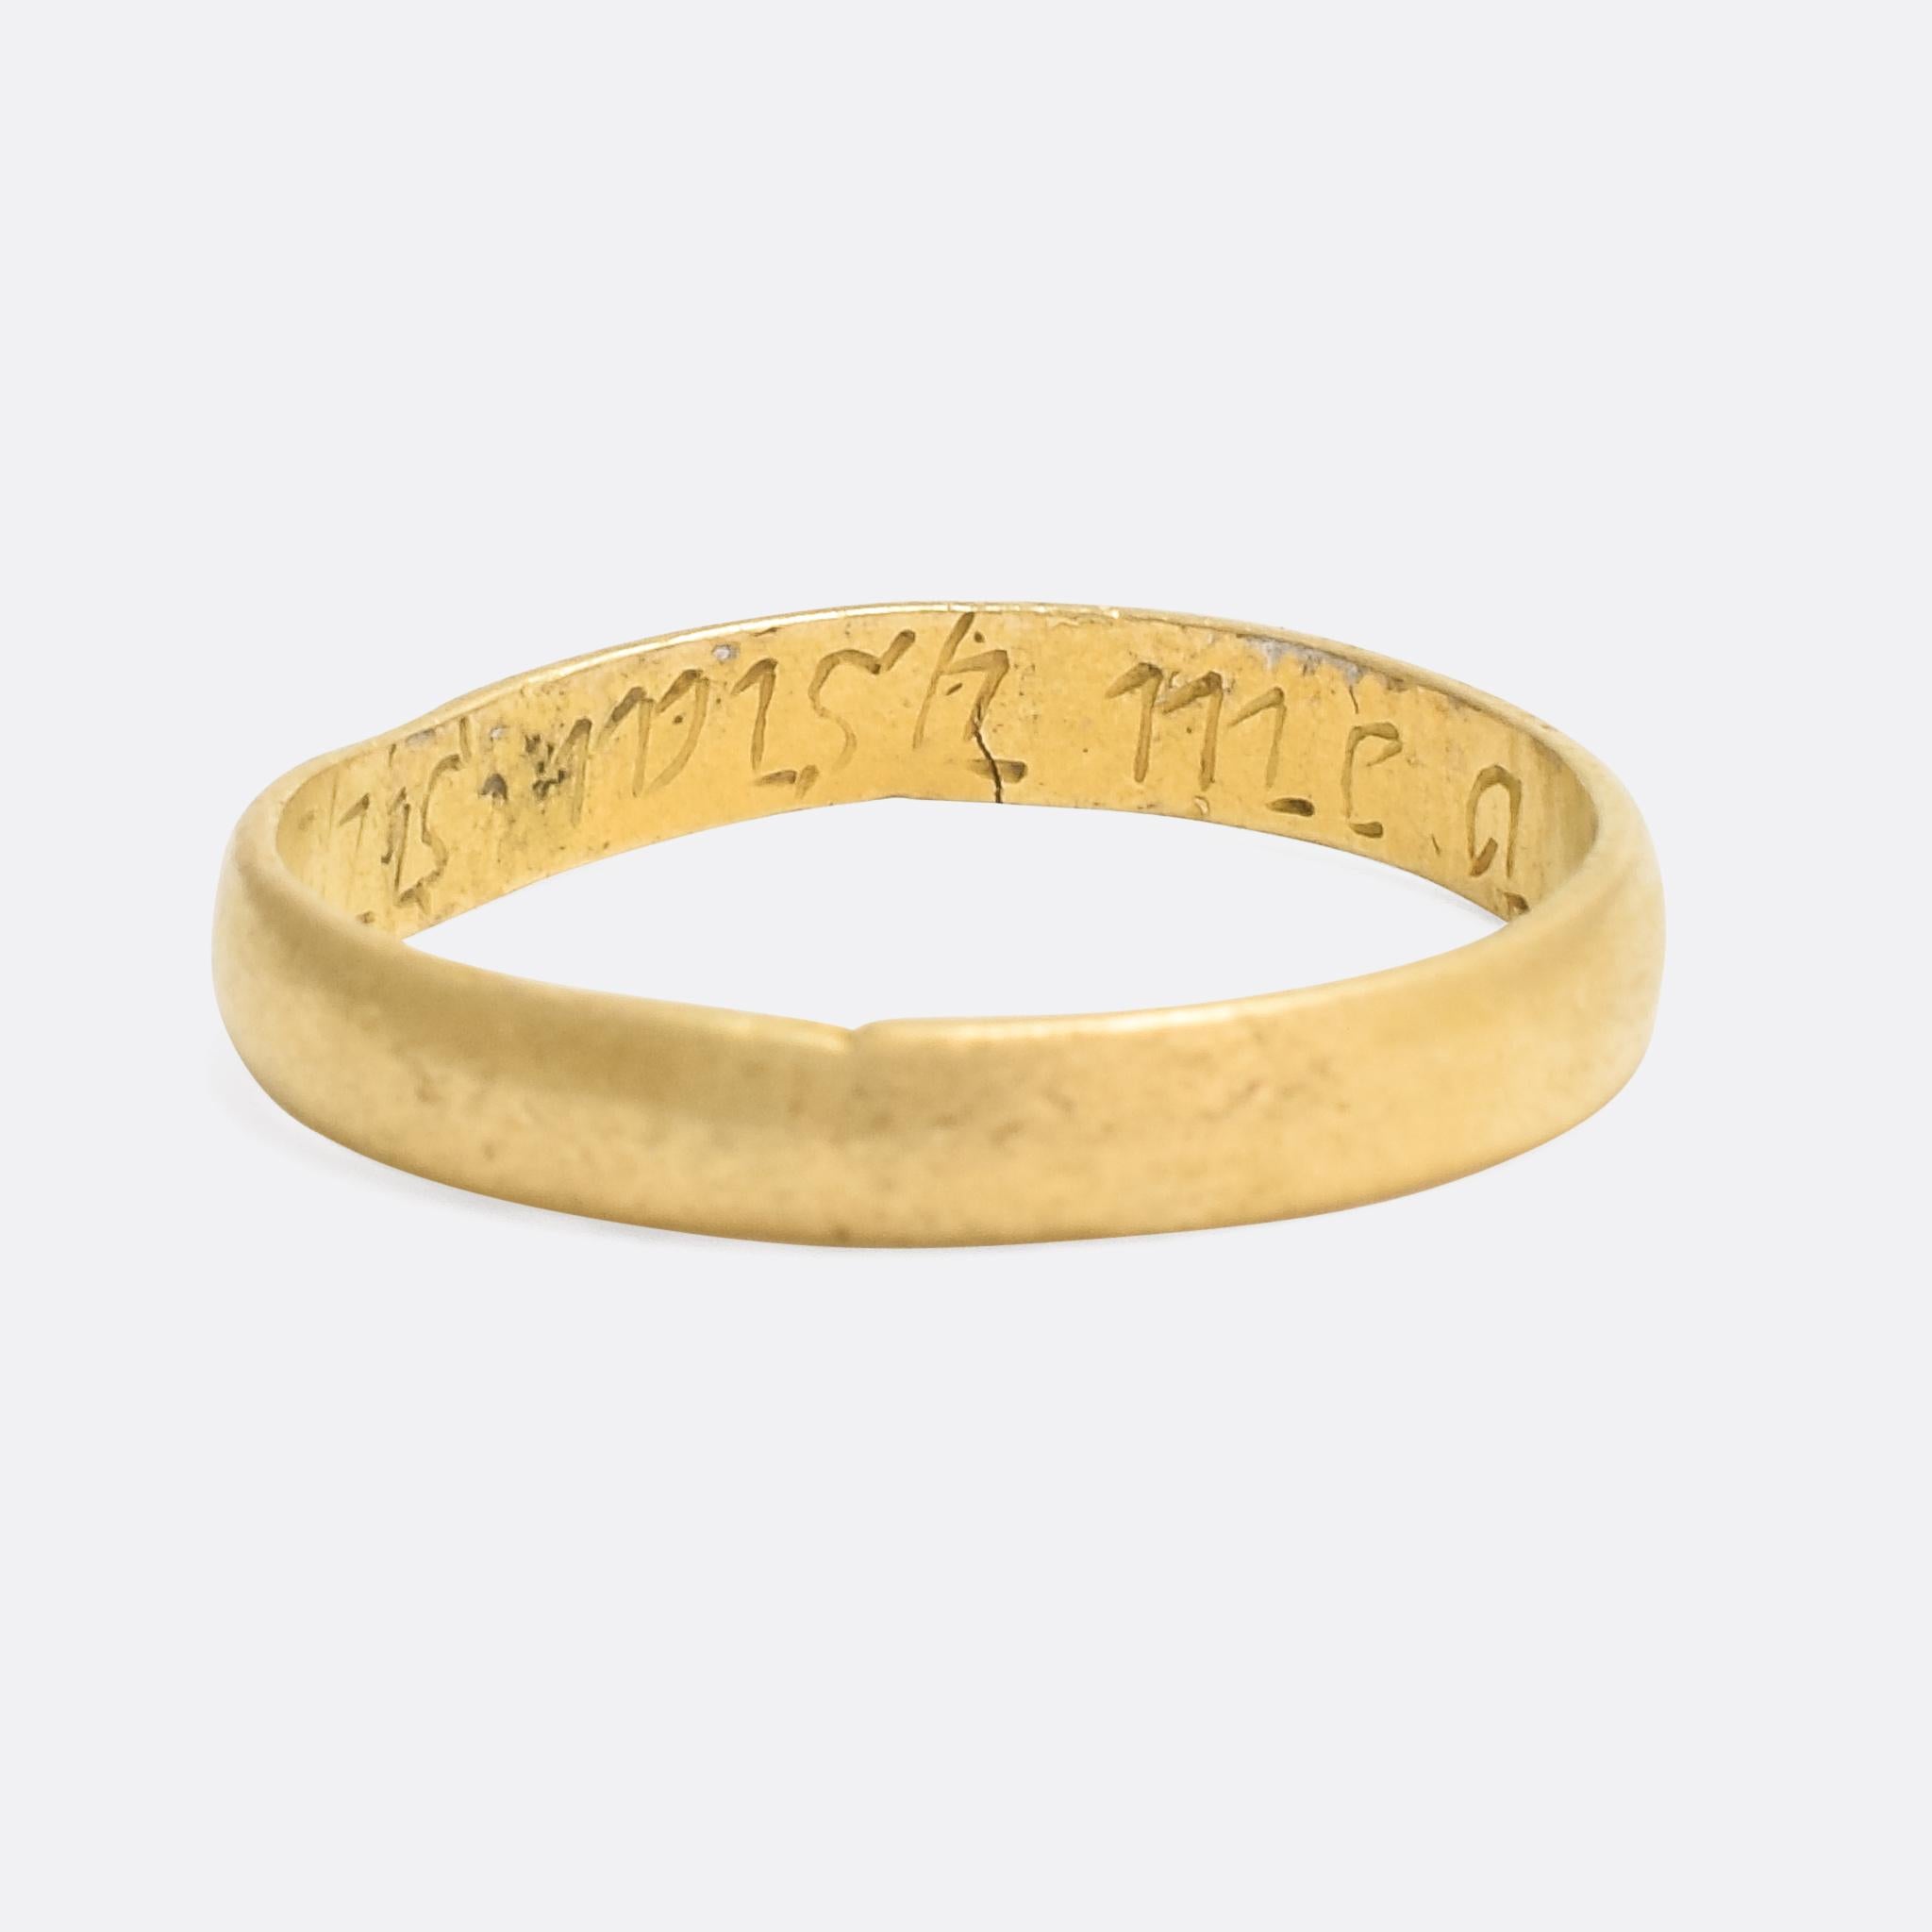 A sweet 18th Century Posy Ring modelled in 18k yellow gold. The inscription to the inner band reads 